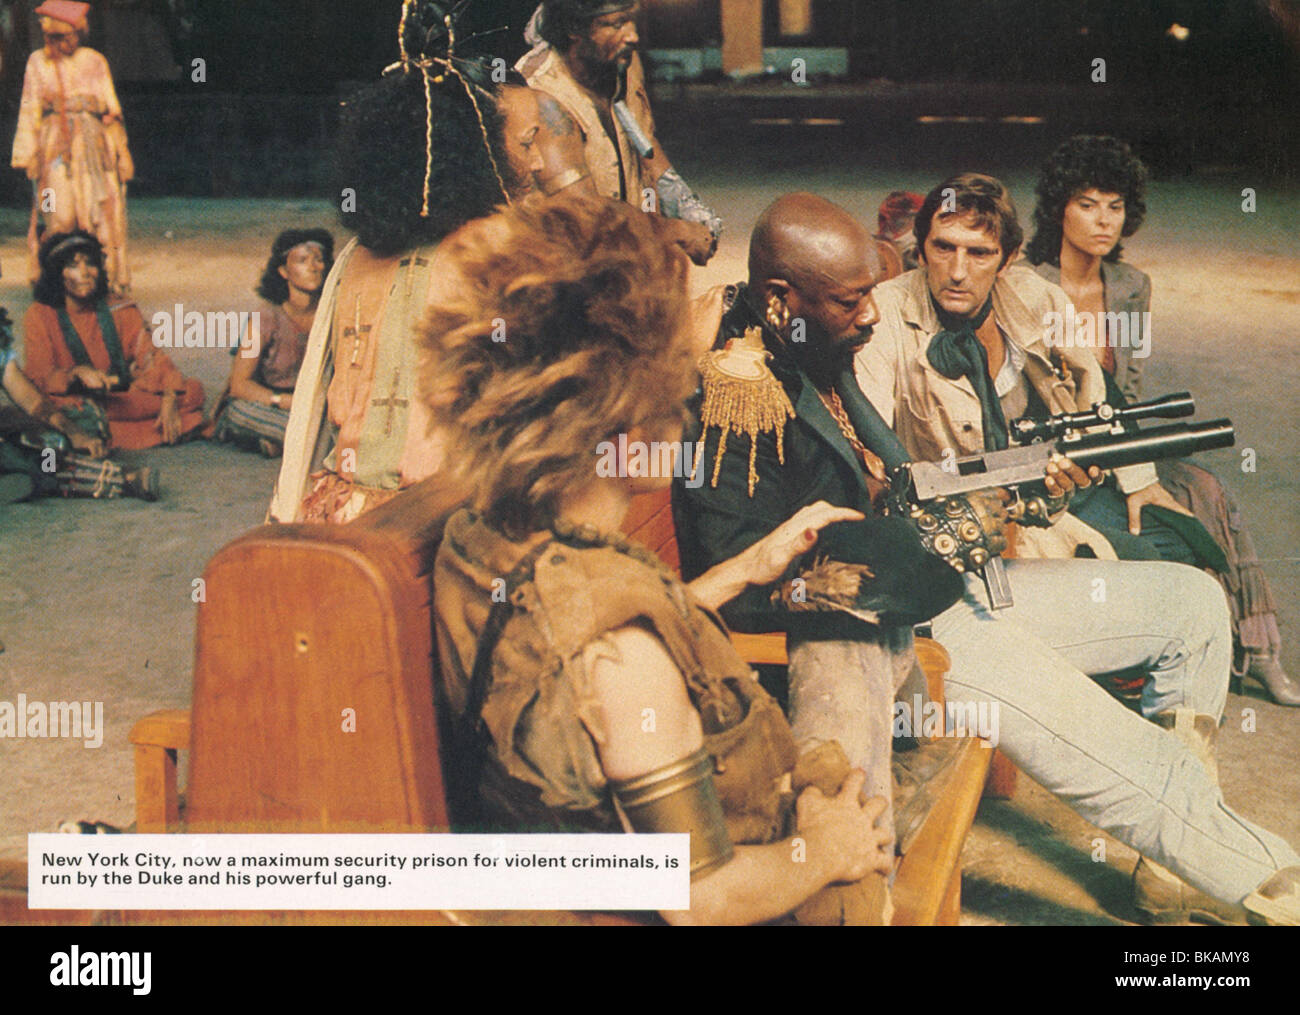 ESCAPE FROM NEW YORK (1981) ISAAC HAYES, HARRY DEAN STANTON, ADRIENNE BARBEAU ESNY 001FOH Stock Photo